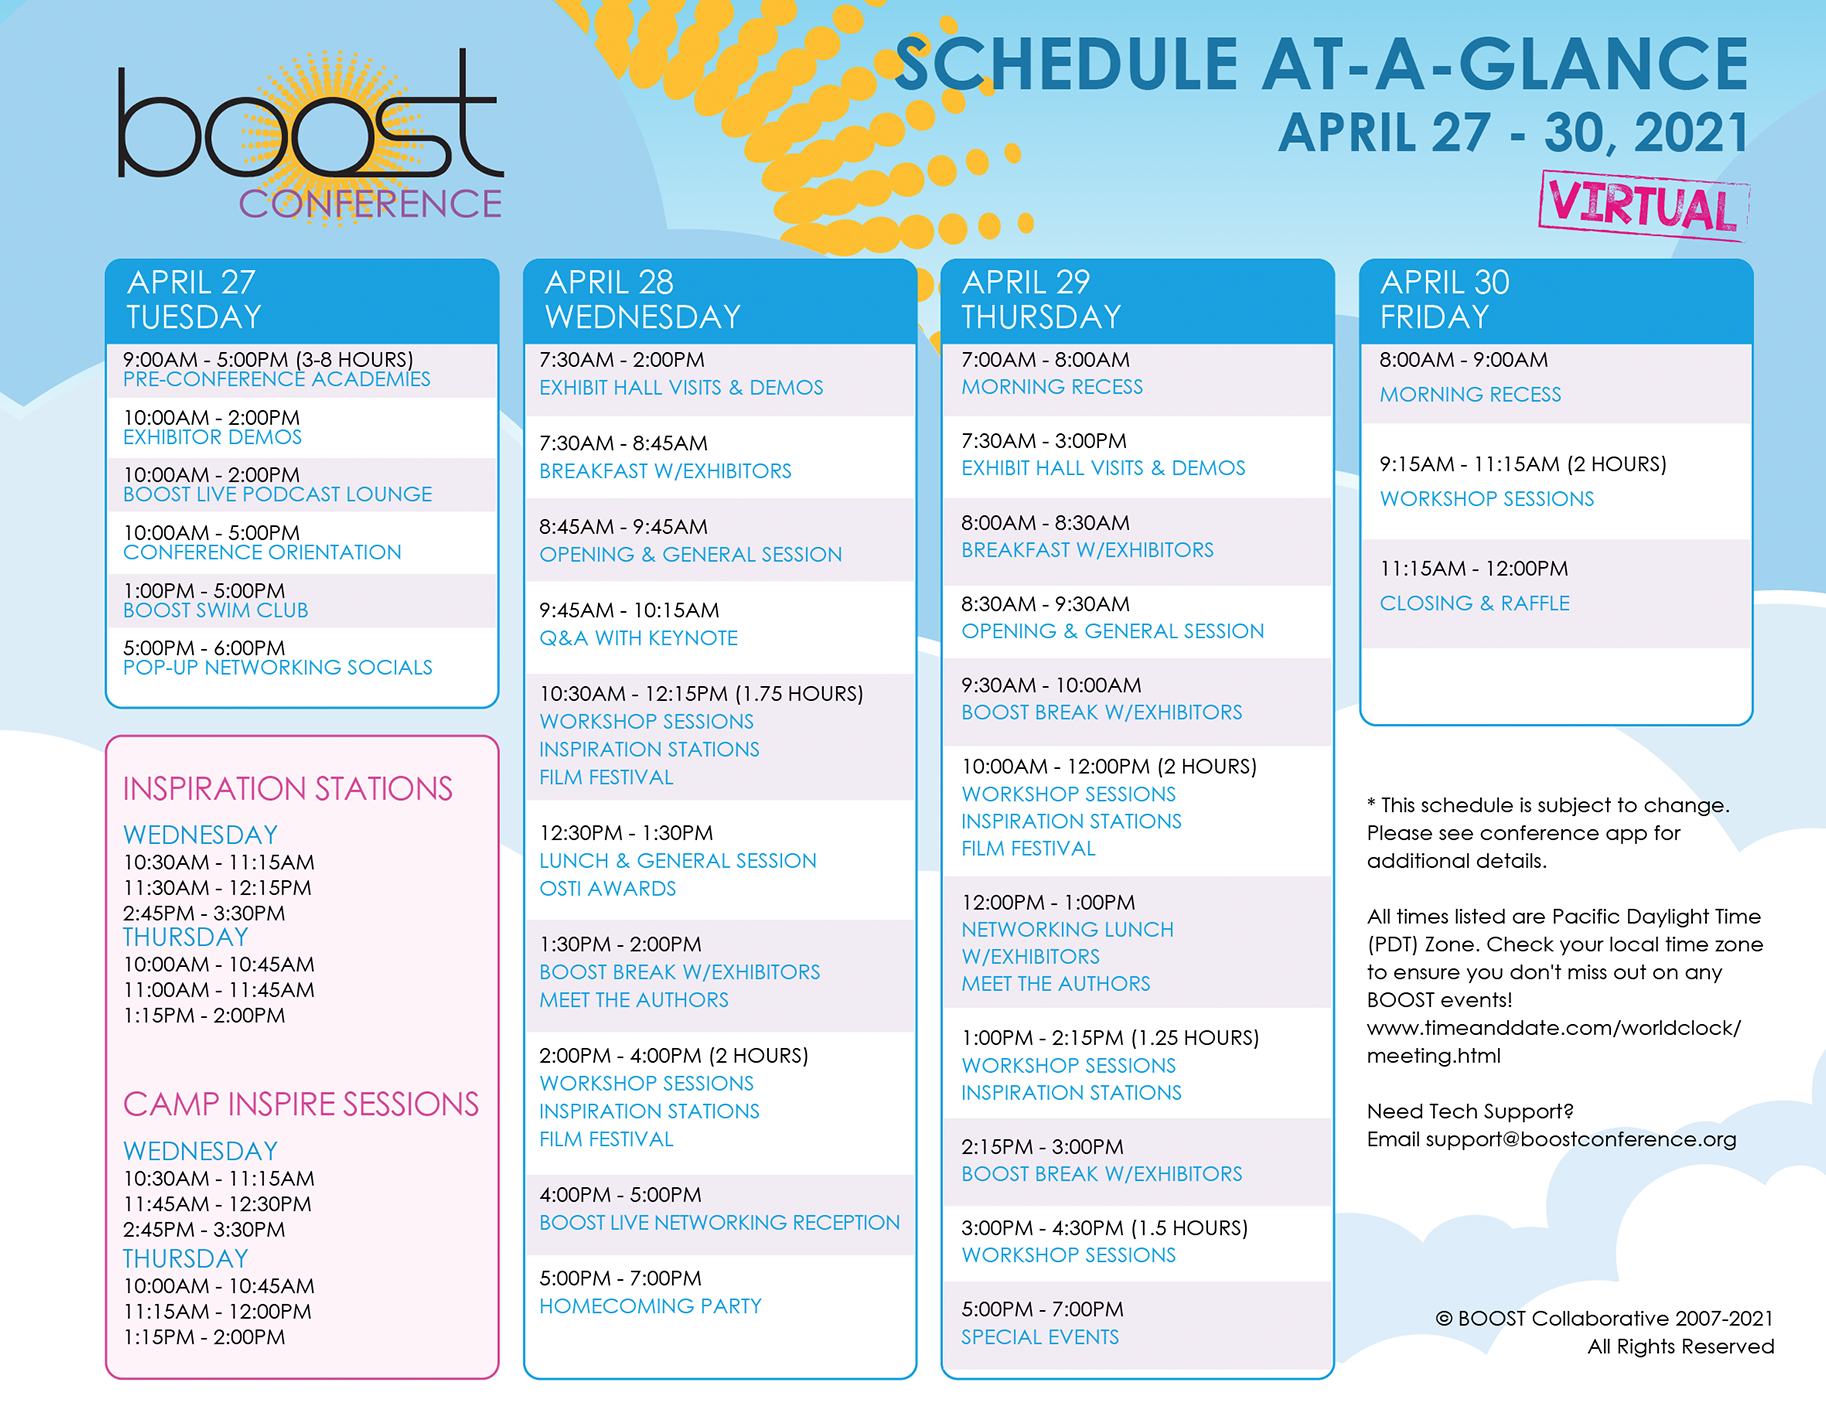 Thumbnail image of the 2021 BOOST Conference Schedule at a Glance